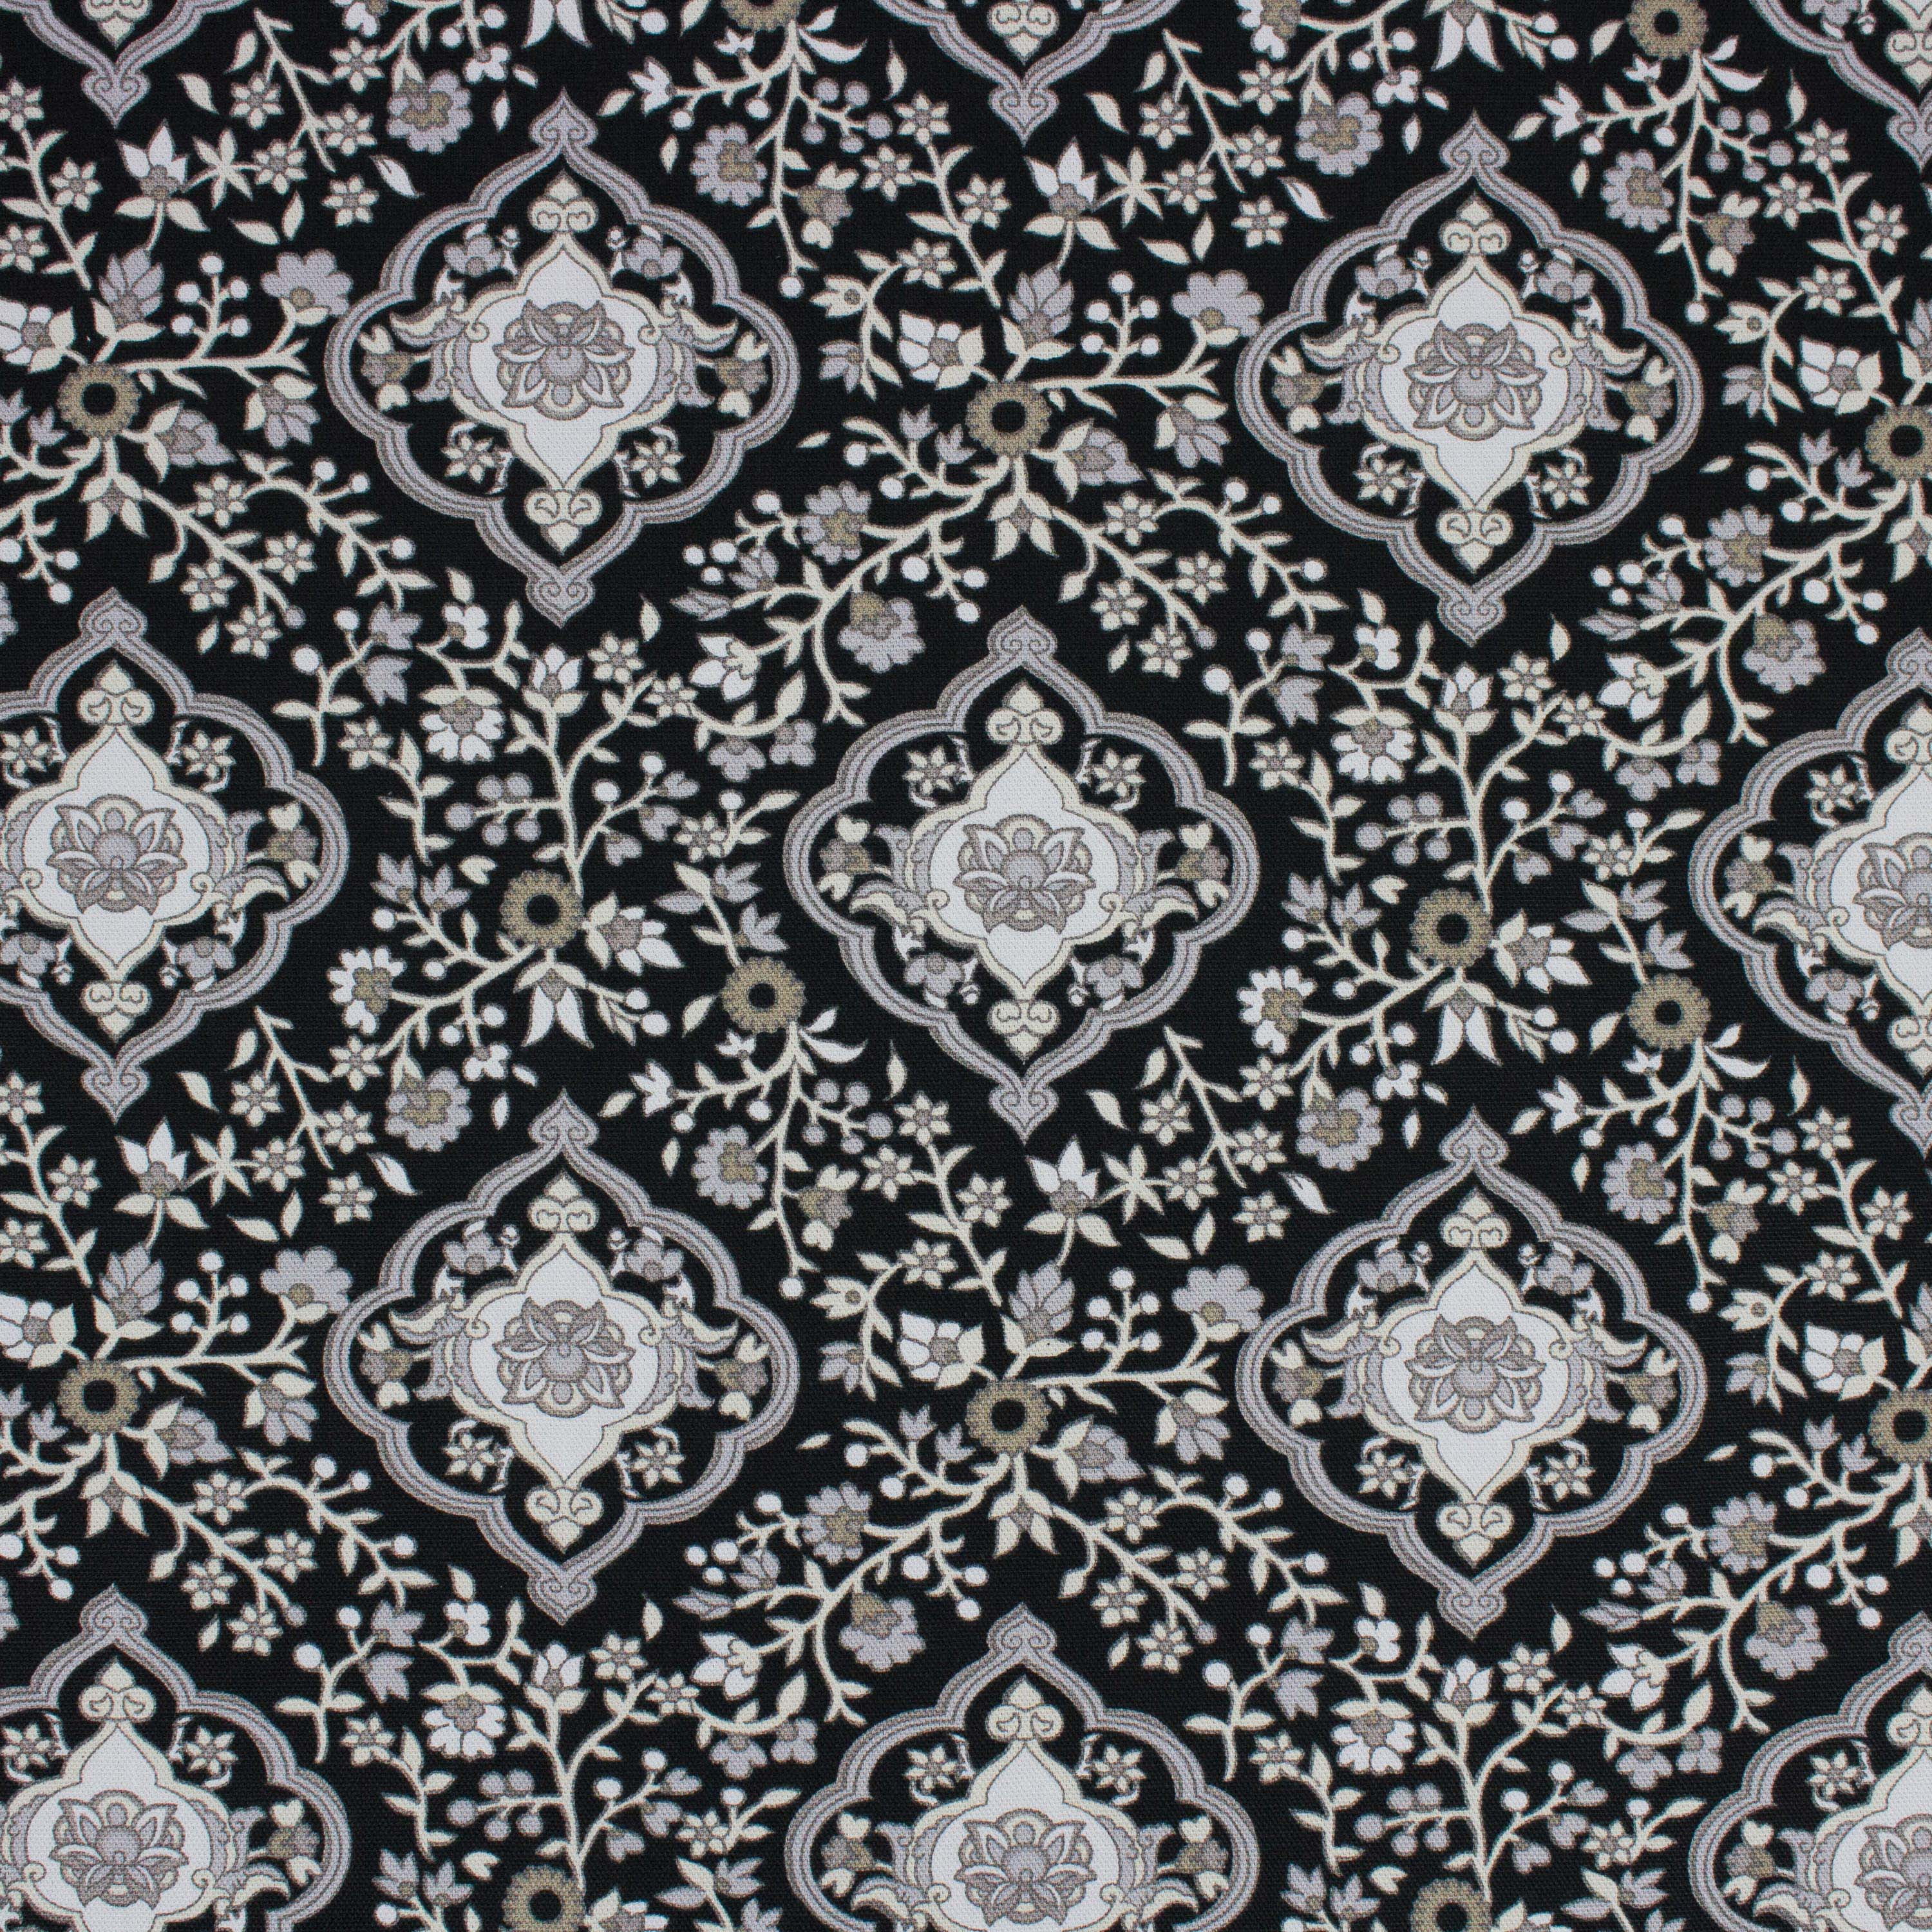 Gray Fabric Floral Modern Nursery 160 cm with plant print Fabric by the yard Cotton Fabric Floral Cotton